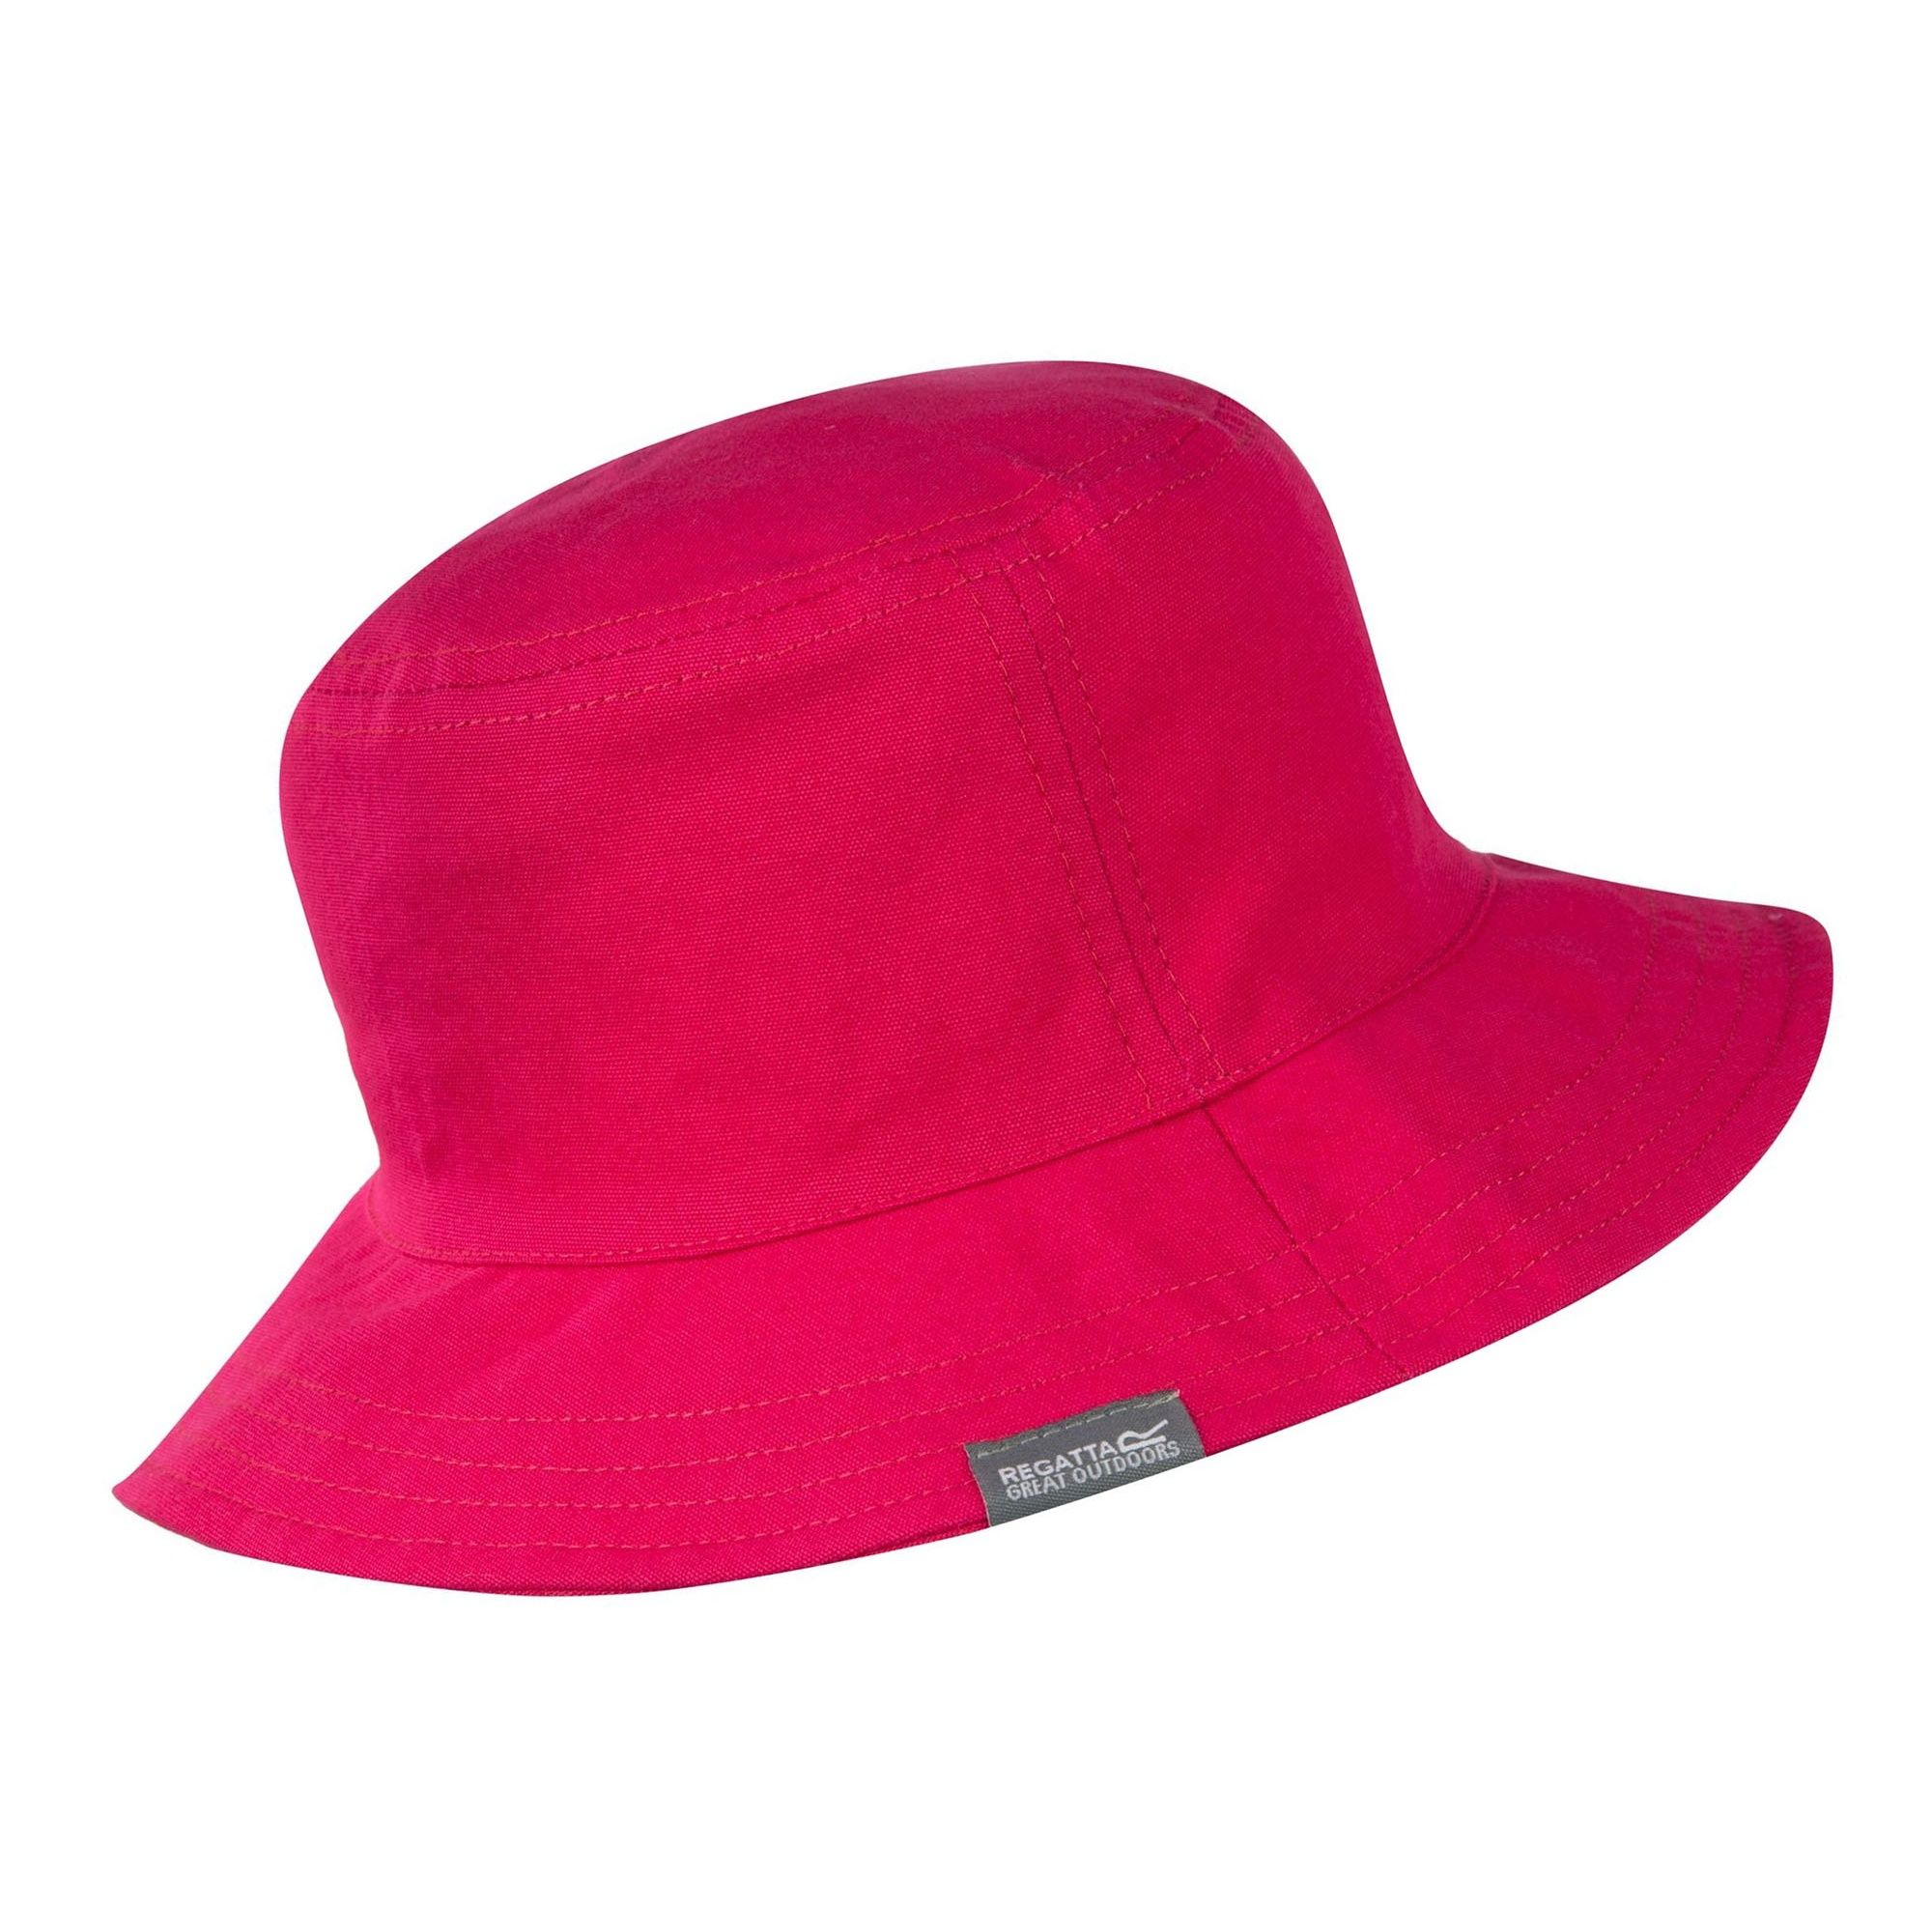 100% coolweave cotton. Childrens hat. Ideal for summer wear. Cool reversible design. Wide brim for extra sun protection.